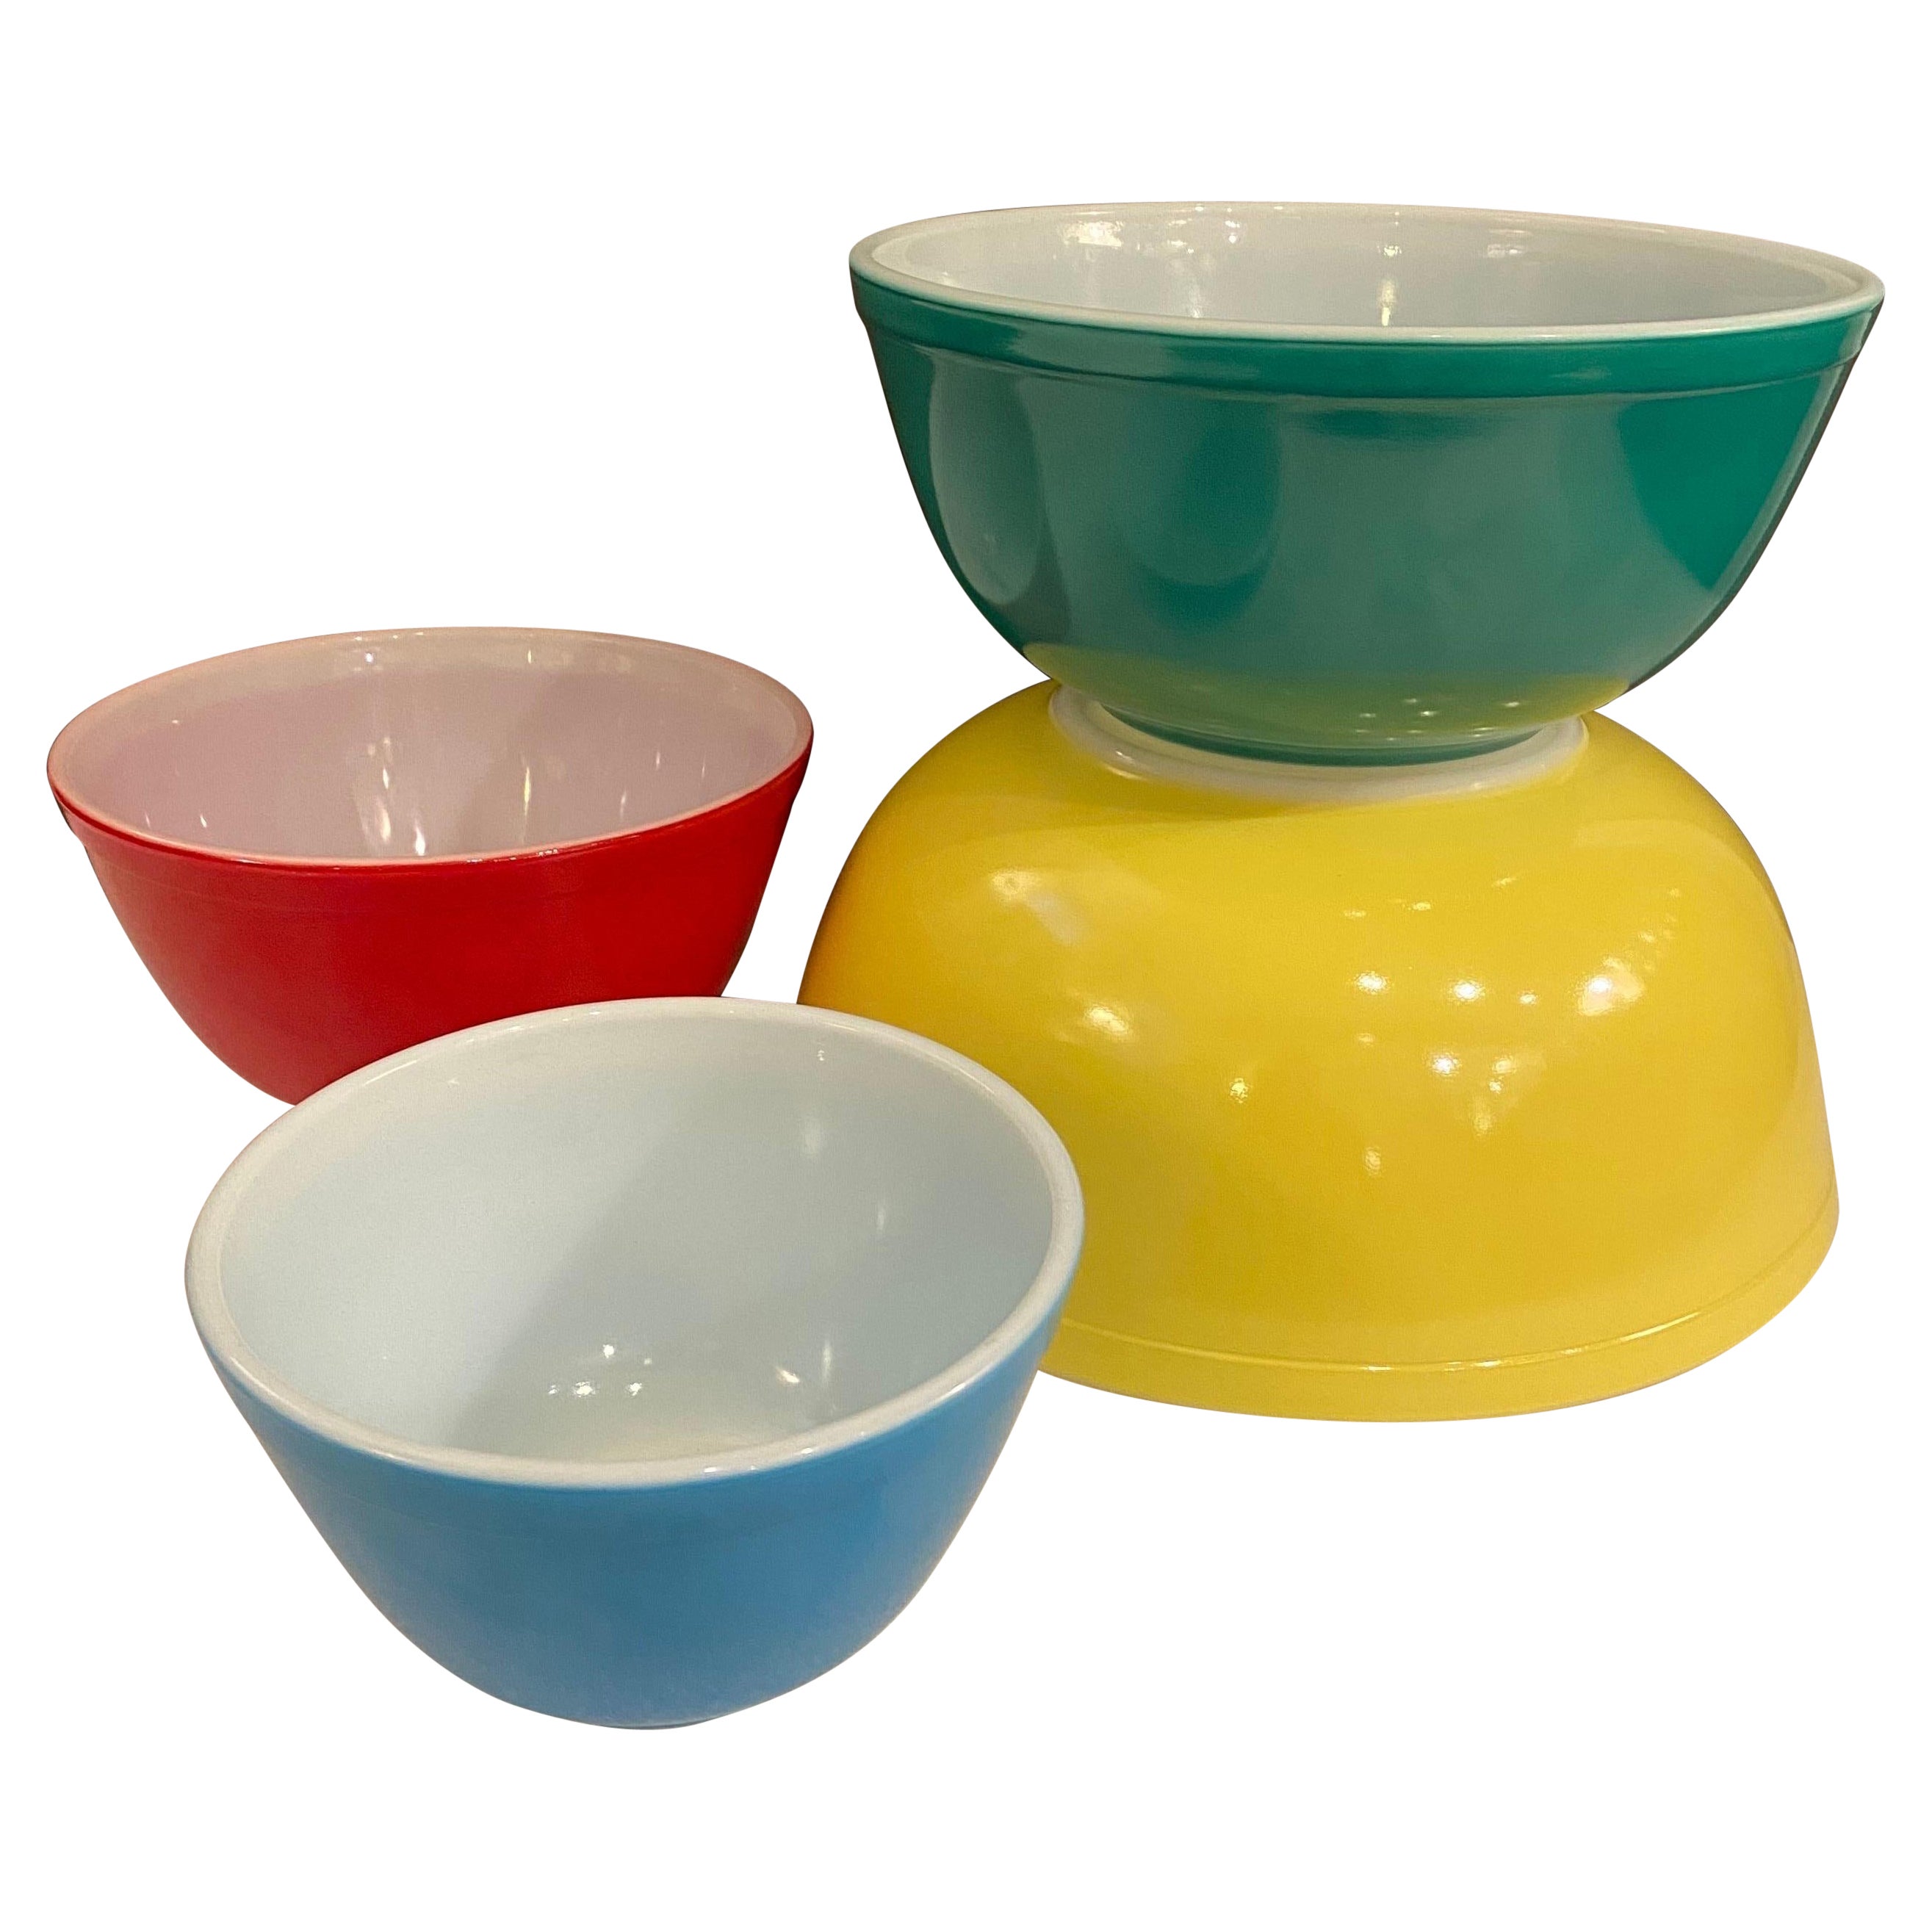 New Old Stock Pyrex Primary Color Bowl Set For Sale